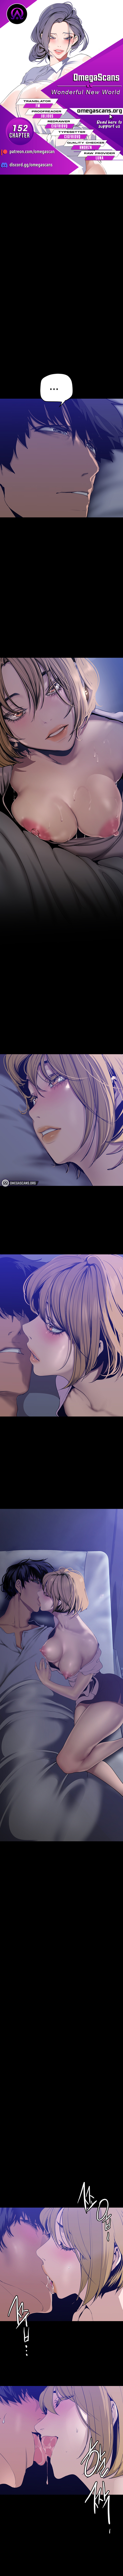 Panel Image 1 for chapter 152 of manhwa A Wonderful New World on read.oppai.stream